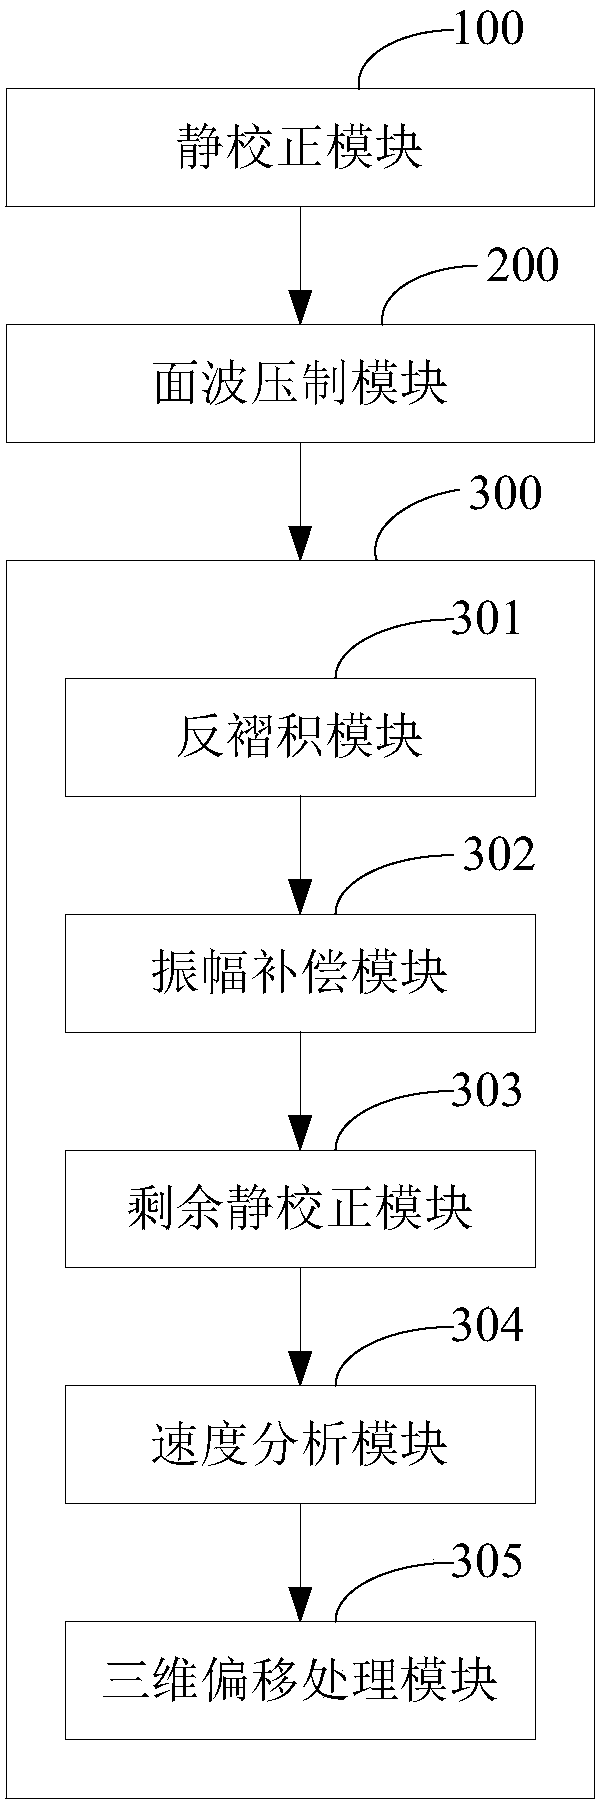 A 3D seismic data processing method and system